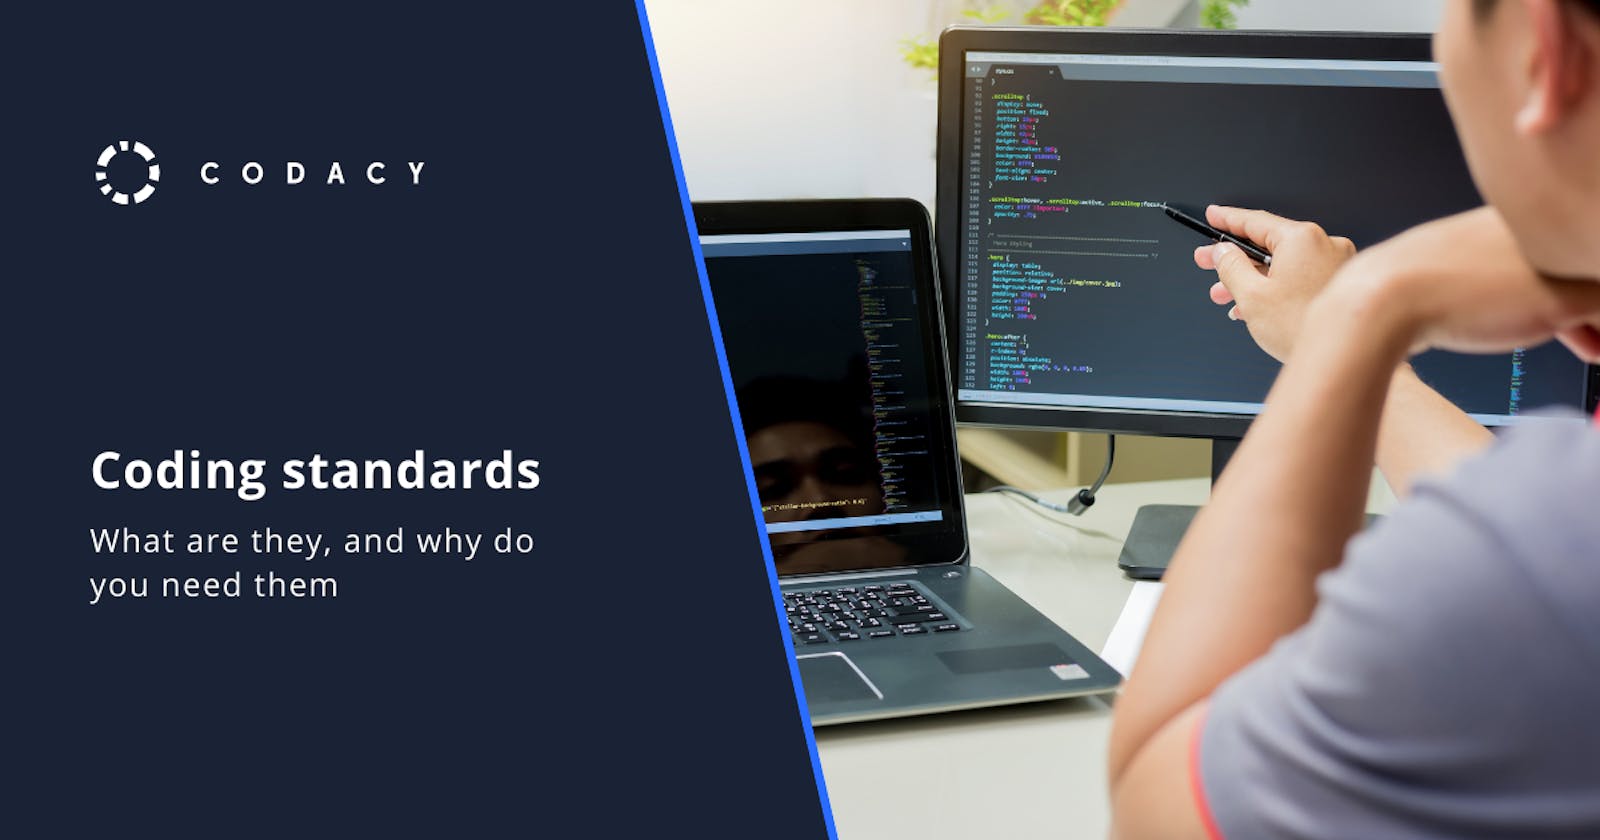 Coding standards: what are they and why do you need them